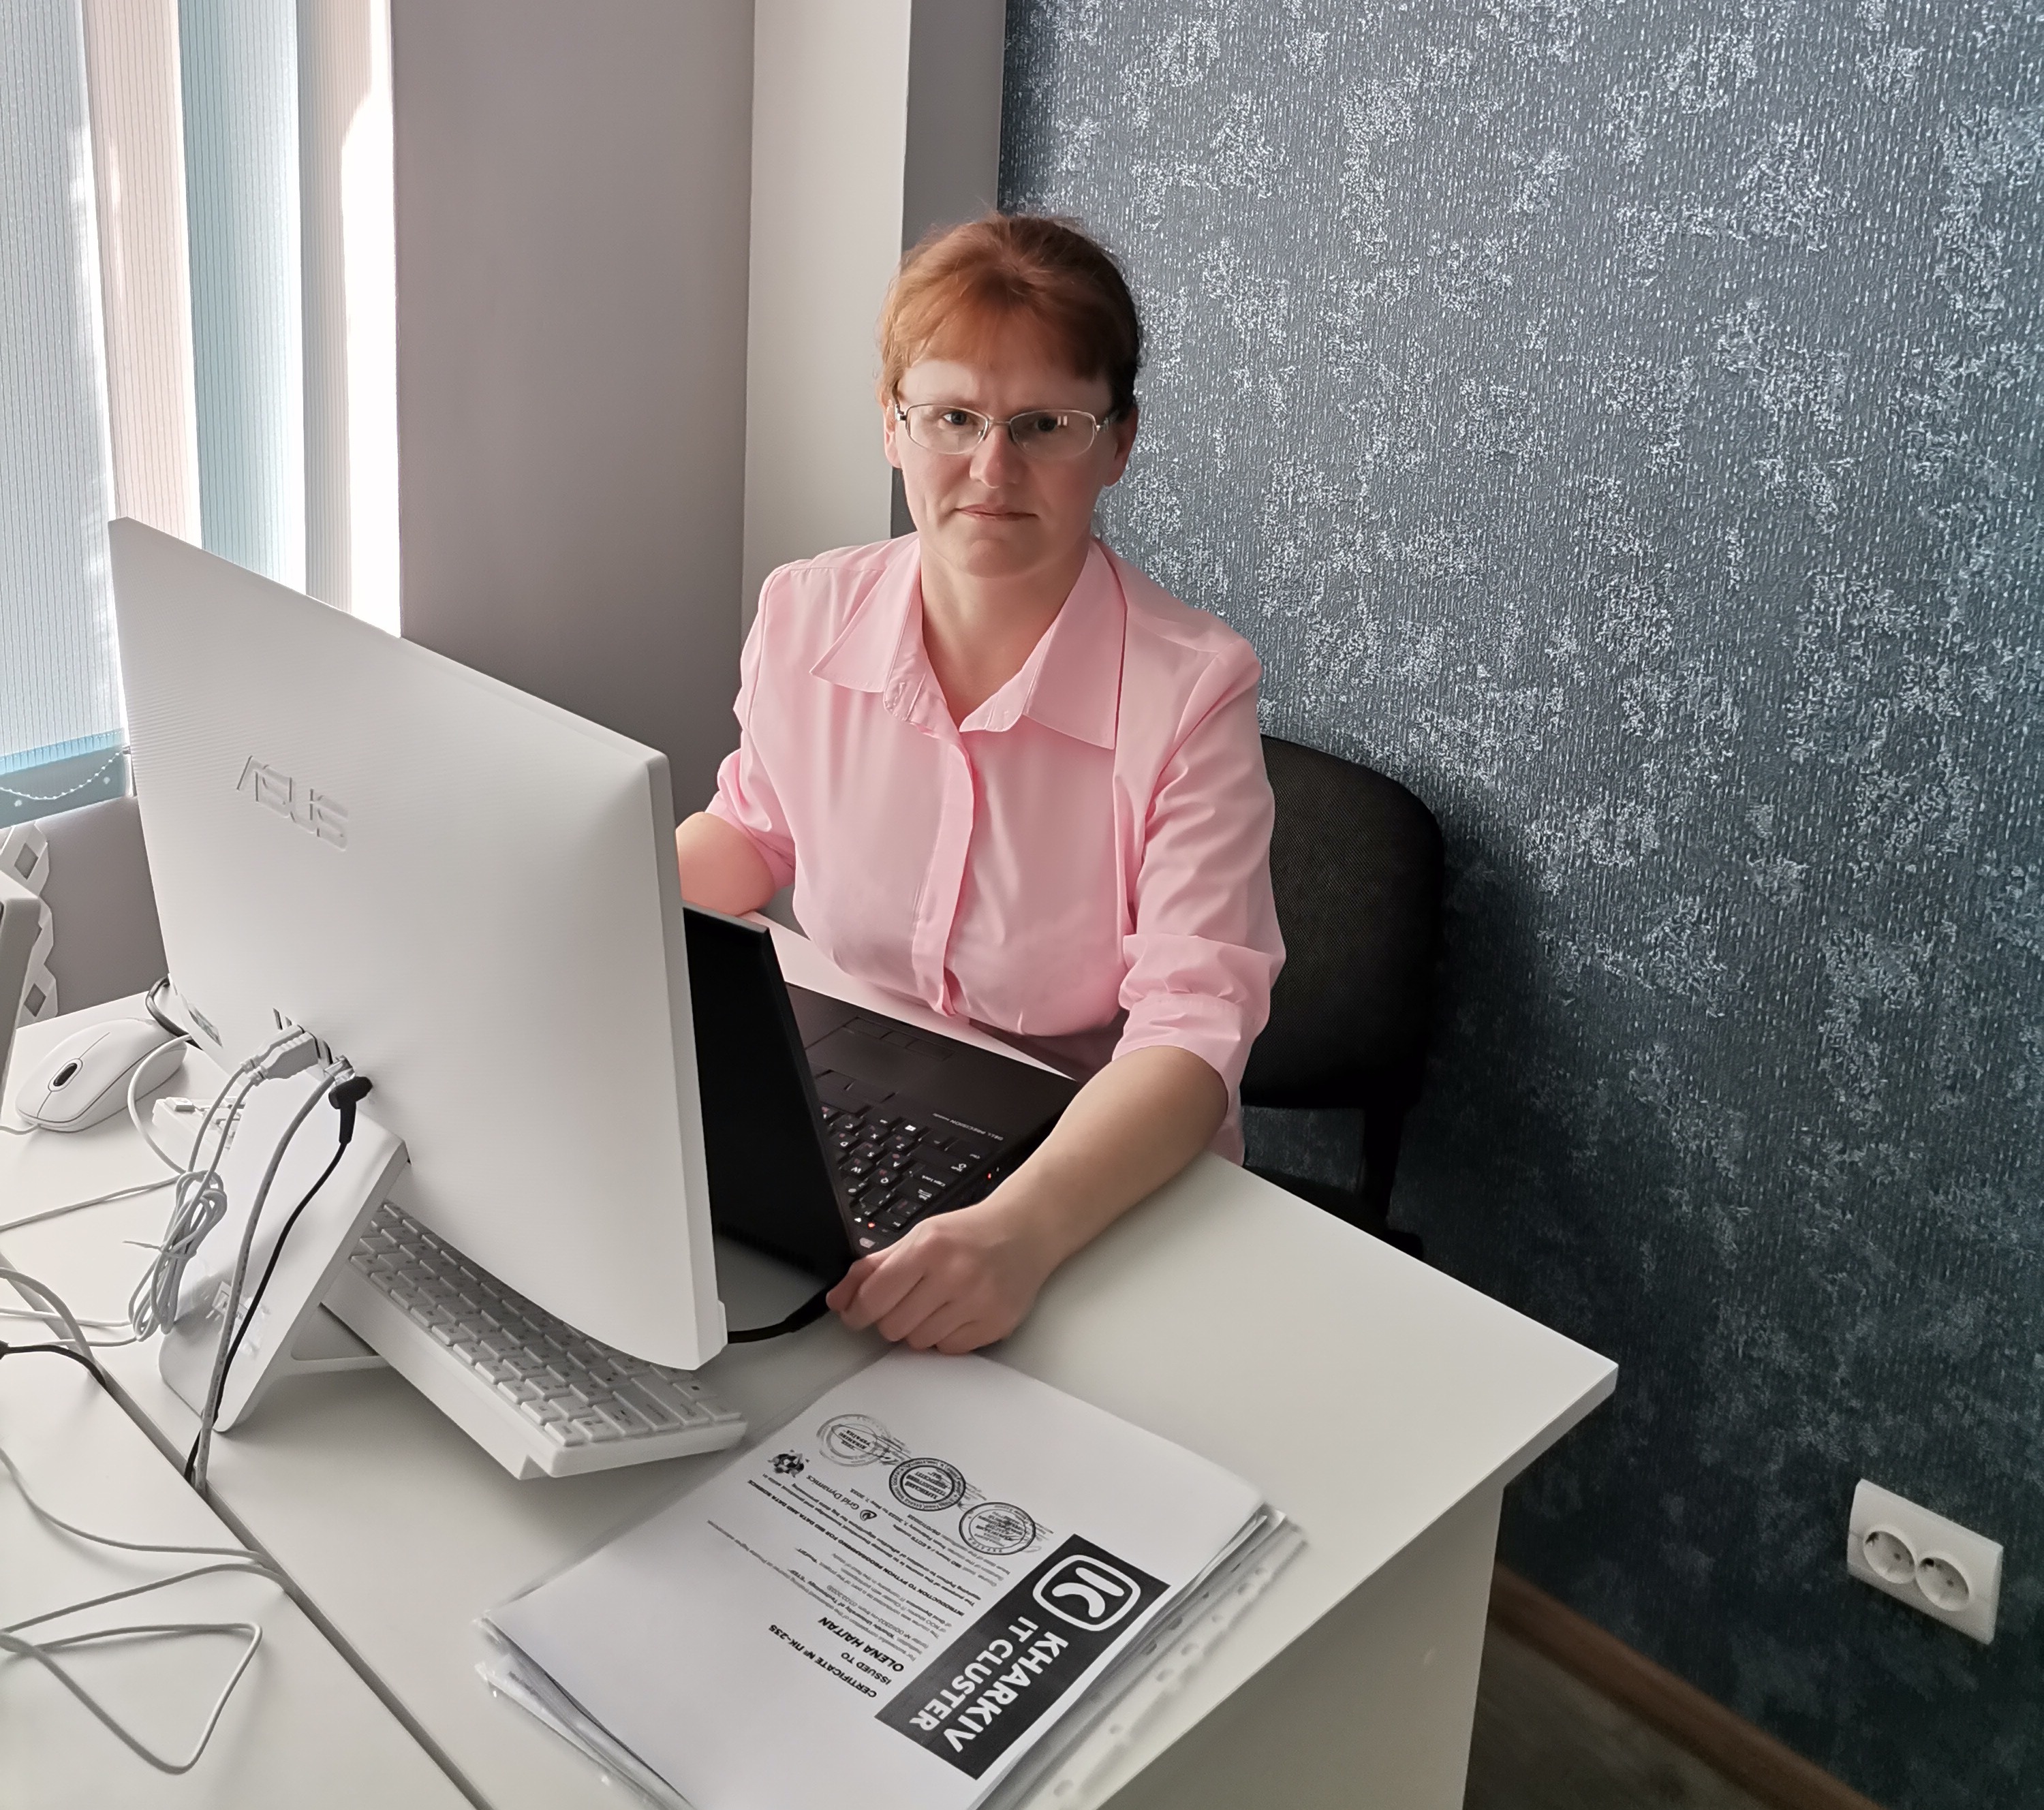 Poltava Polytechnic teacher is selected to participate in USAID’s Professional Development Programme